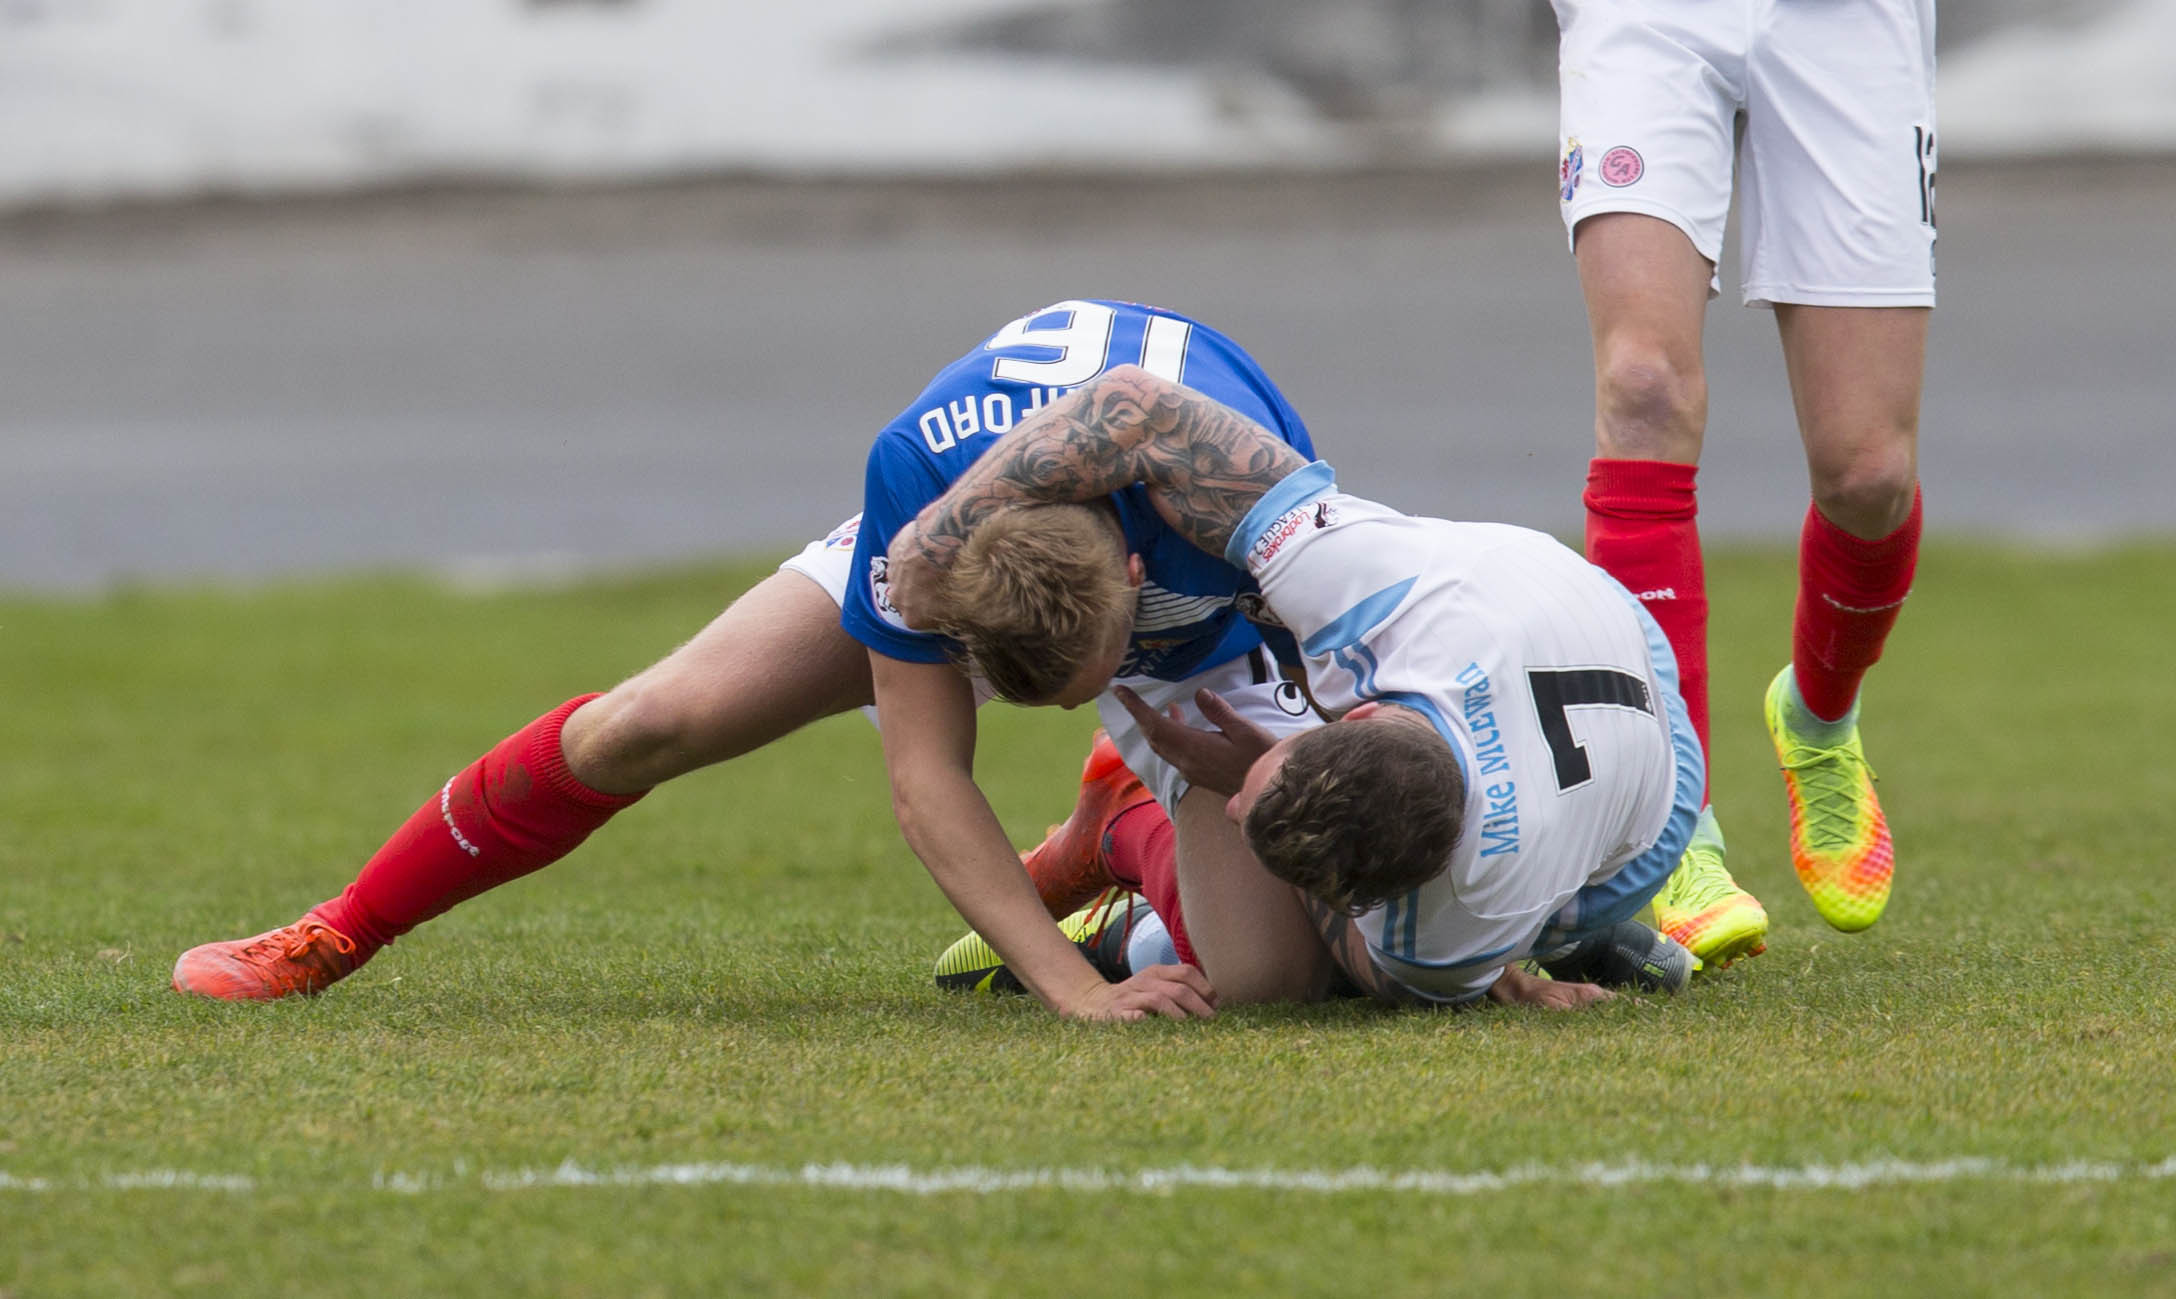 Cowdenbeath's Shaun Rutherford (16) clashes with David Cox.